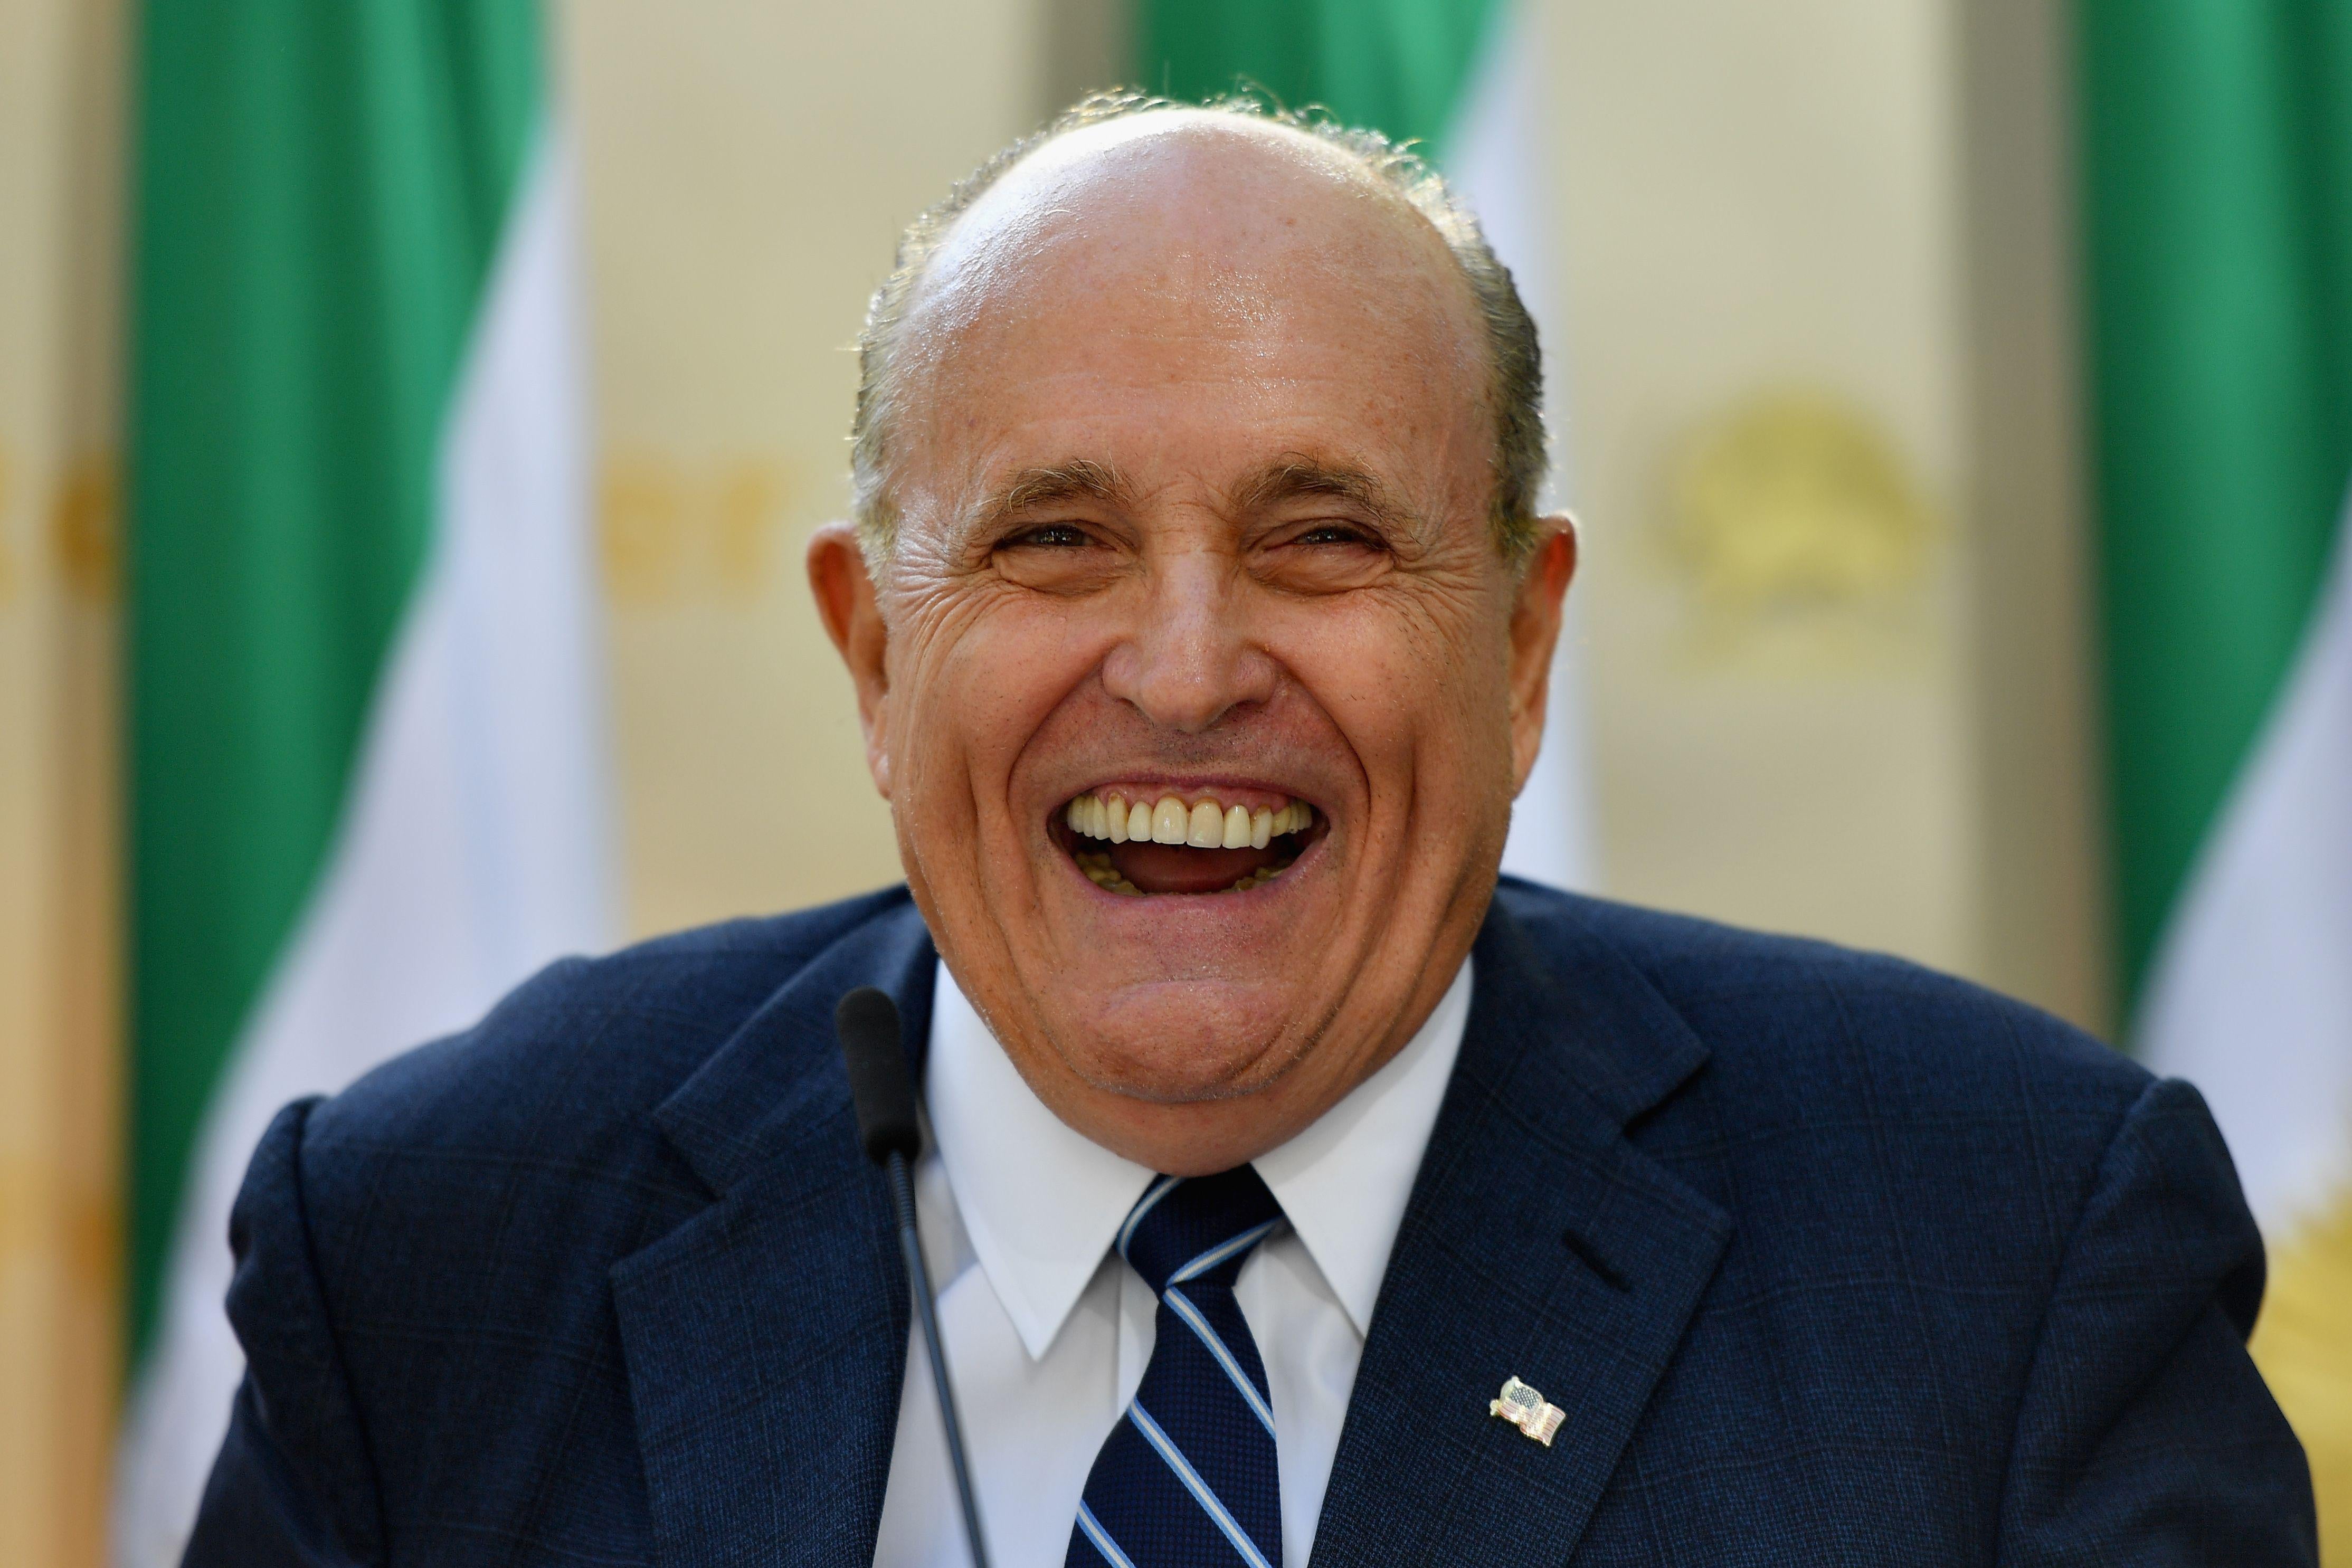 Rudy Giuliani speaks to the Organization of Iranian American Communities during their march to urge "recognition of the Iranian people's right for regime change," outside the United Nations Headquarters in New York on September 24, 2019.